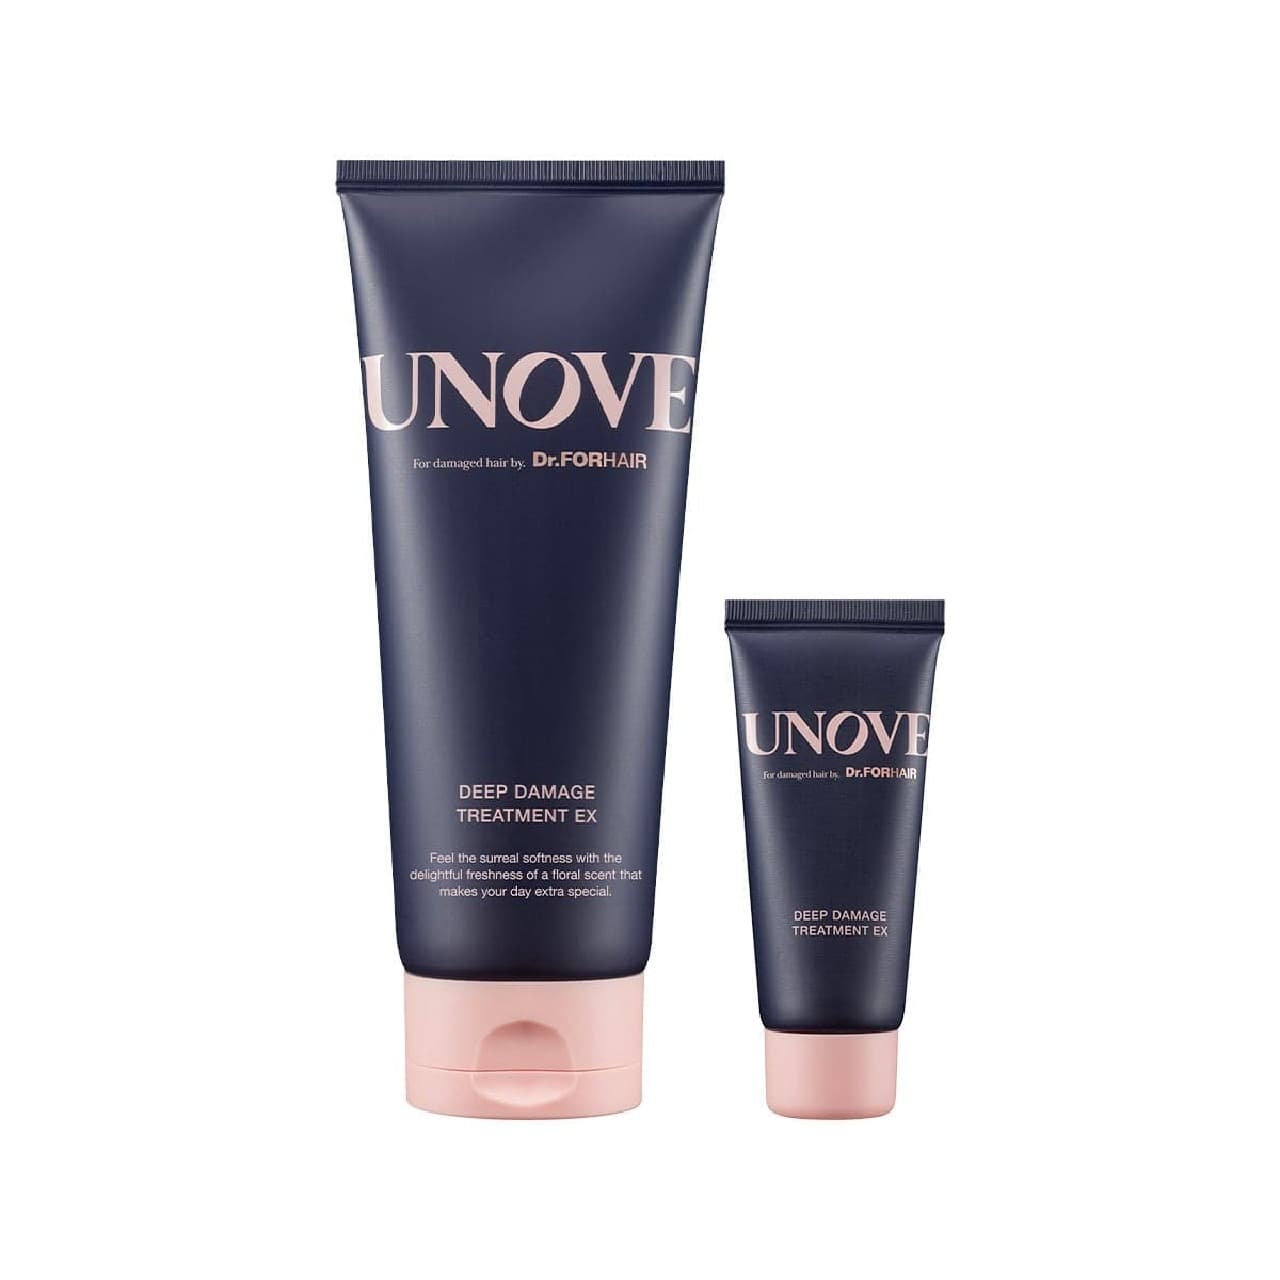 Wyatt Co., Ltd. launches "UNOVE," a hair care brand from Korea, for the first time in Japan, with a total of 11 products, including limited editions, on April 10 Image 2